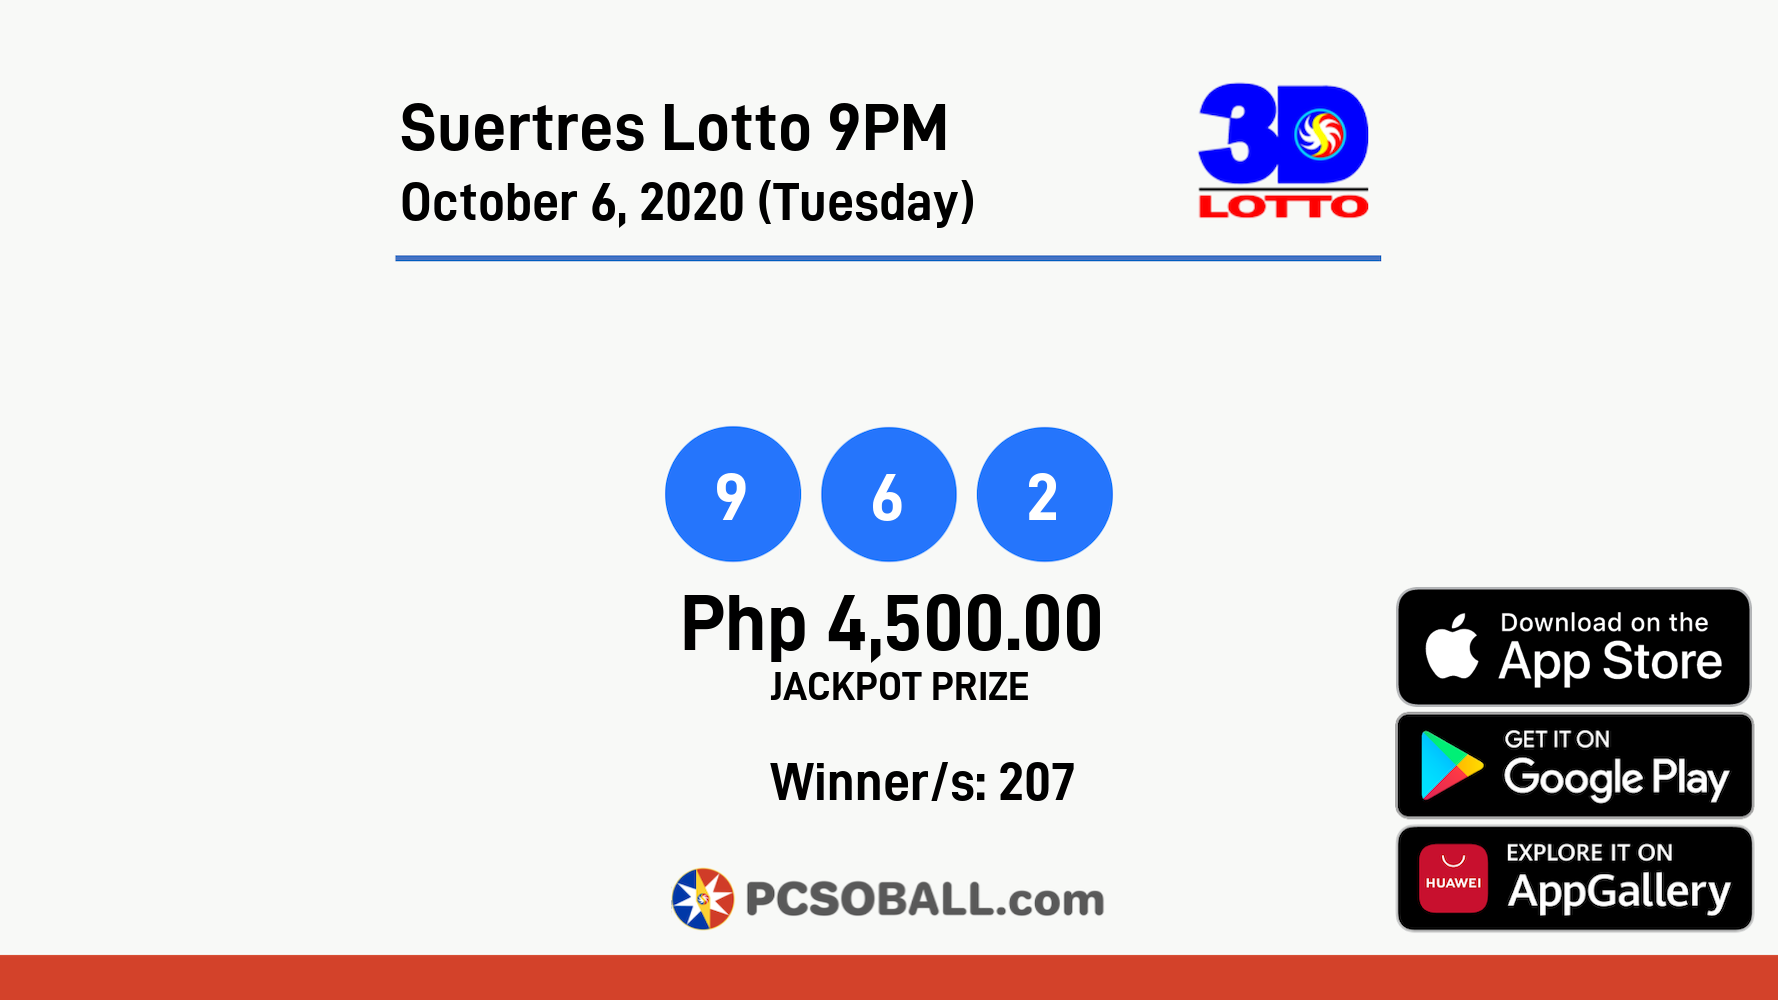 Suertres Lotto 9PM October 6, 2020 (Tuesday) Result